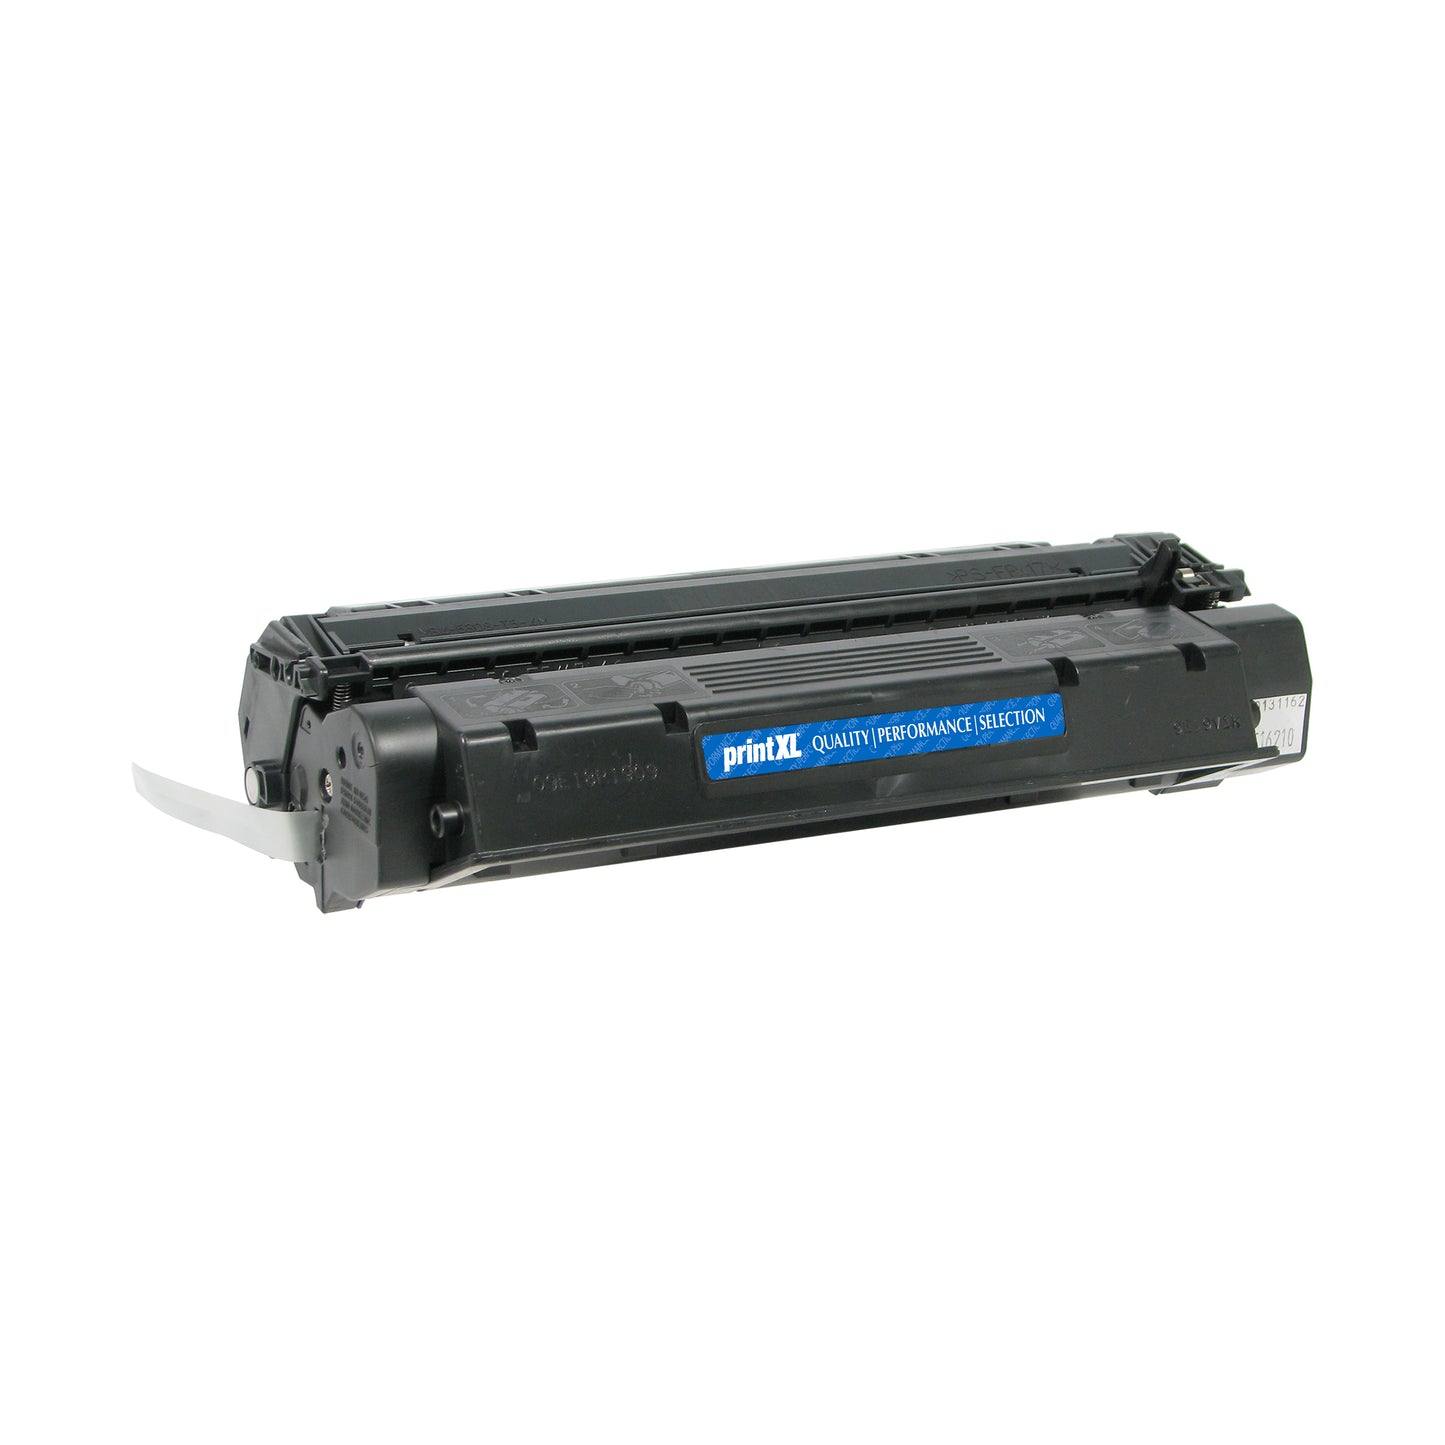 HP 24X (Q2624X) High Yield Remanufactured Toner Cartridge [4,000 pages]